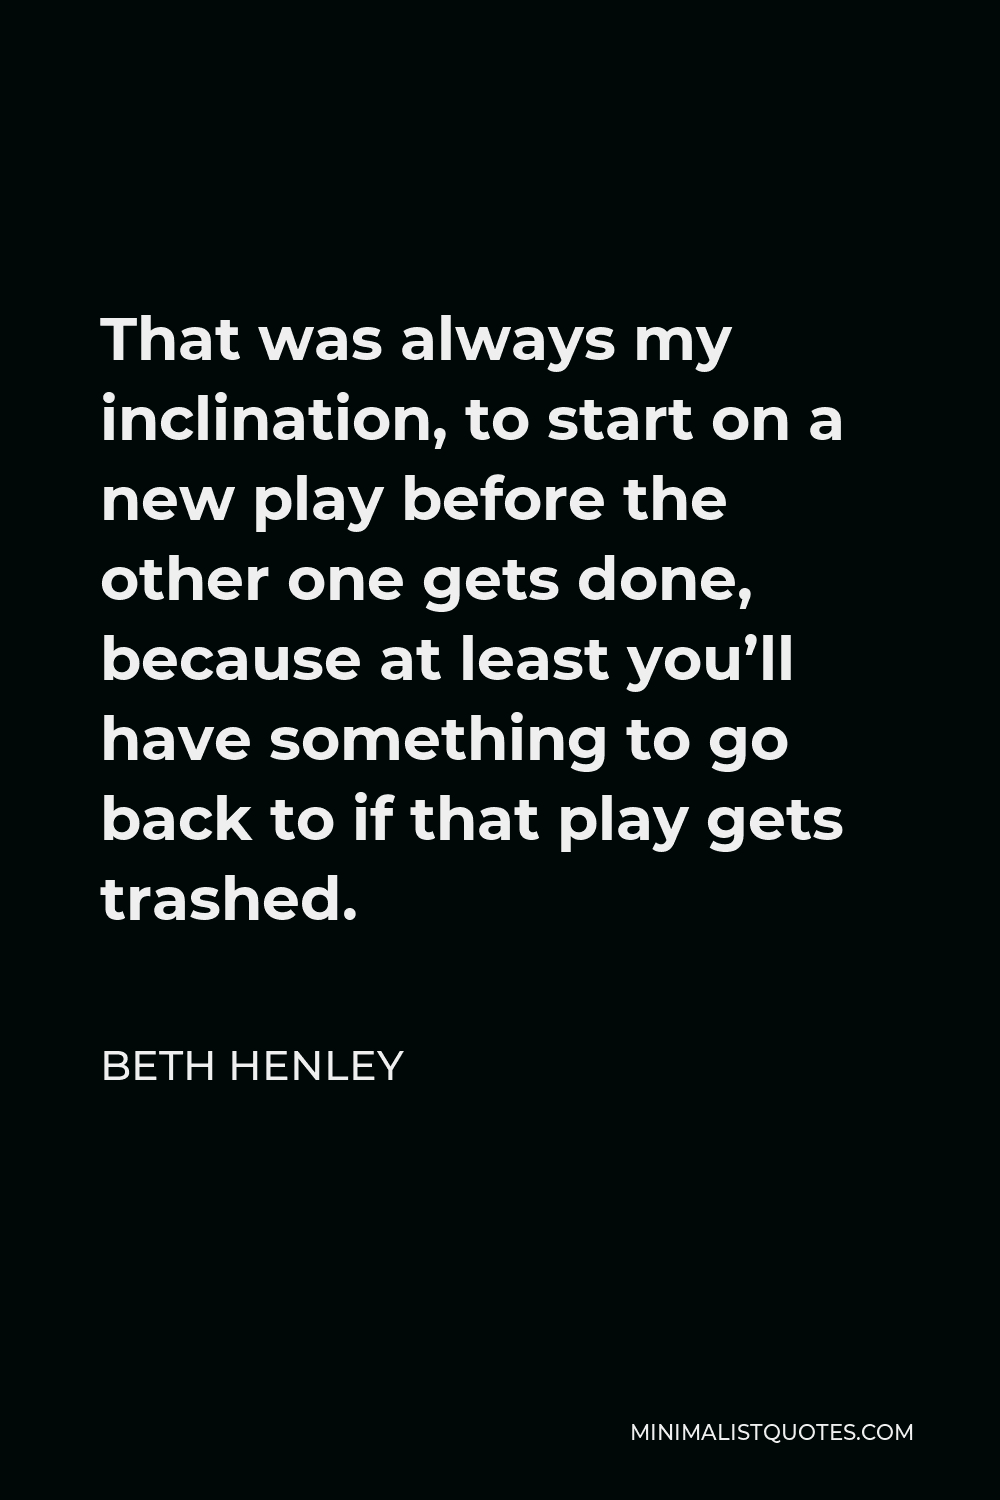 Beth Henley Quote - That was always my inclination, to start on a new play before the other one gets done, because at least you’ll have something to go back to if that play gets trashed.